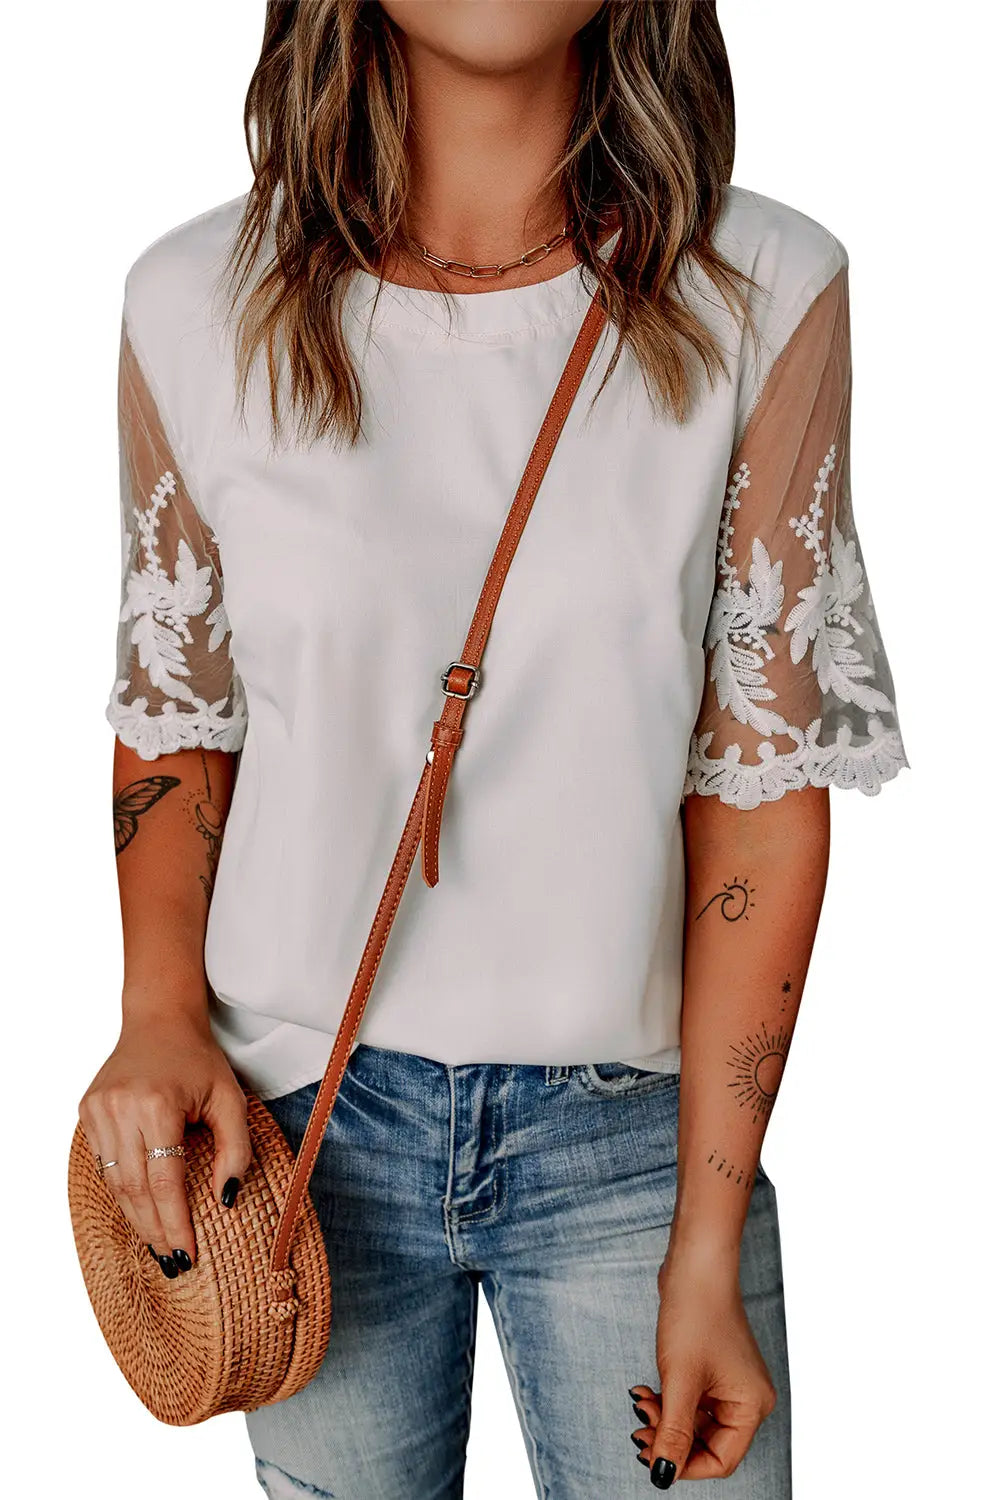 White floral lace sleeve patchwork top - t-shirts